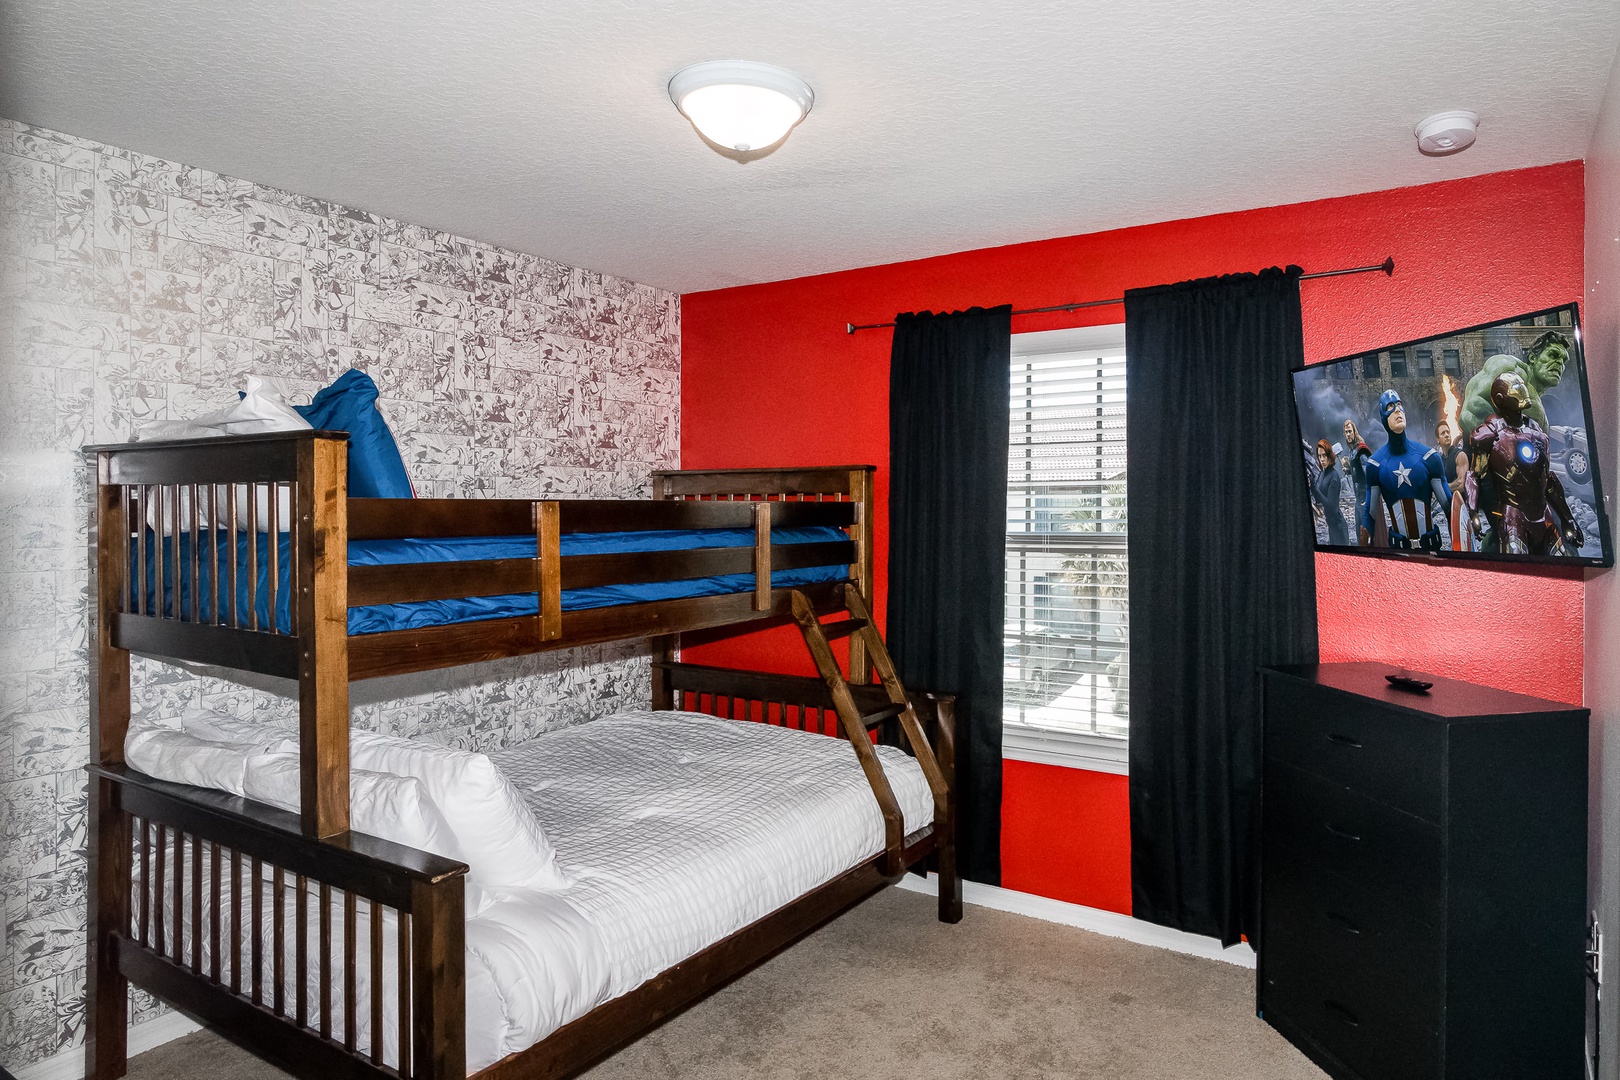 Bedroom 2 Avengers themed with Twin/Full bunk bed, and Smart TV (2nd floor)